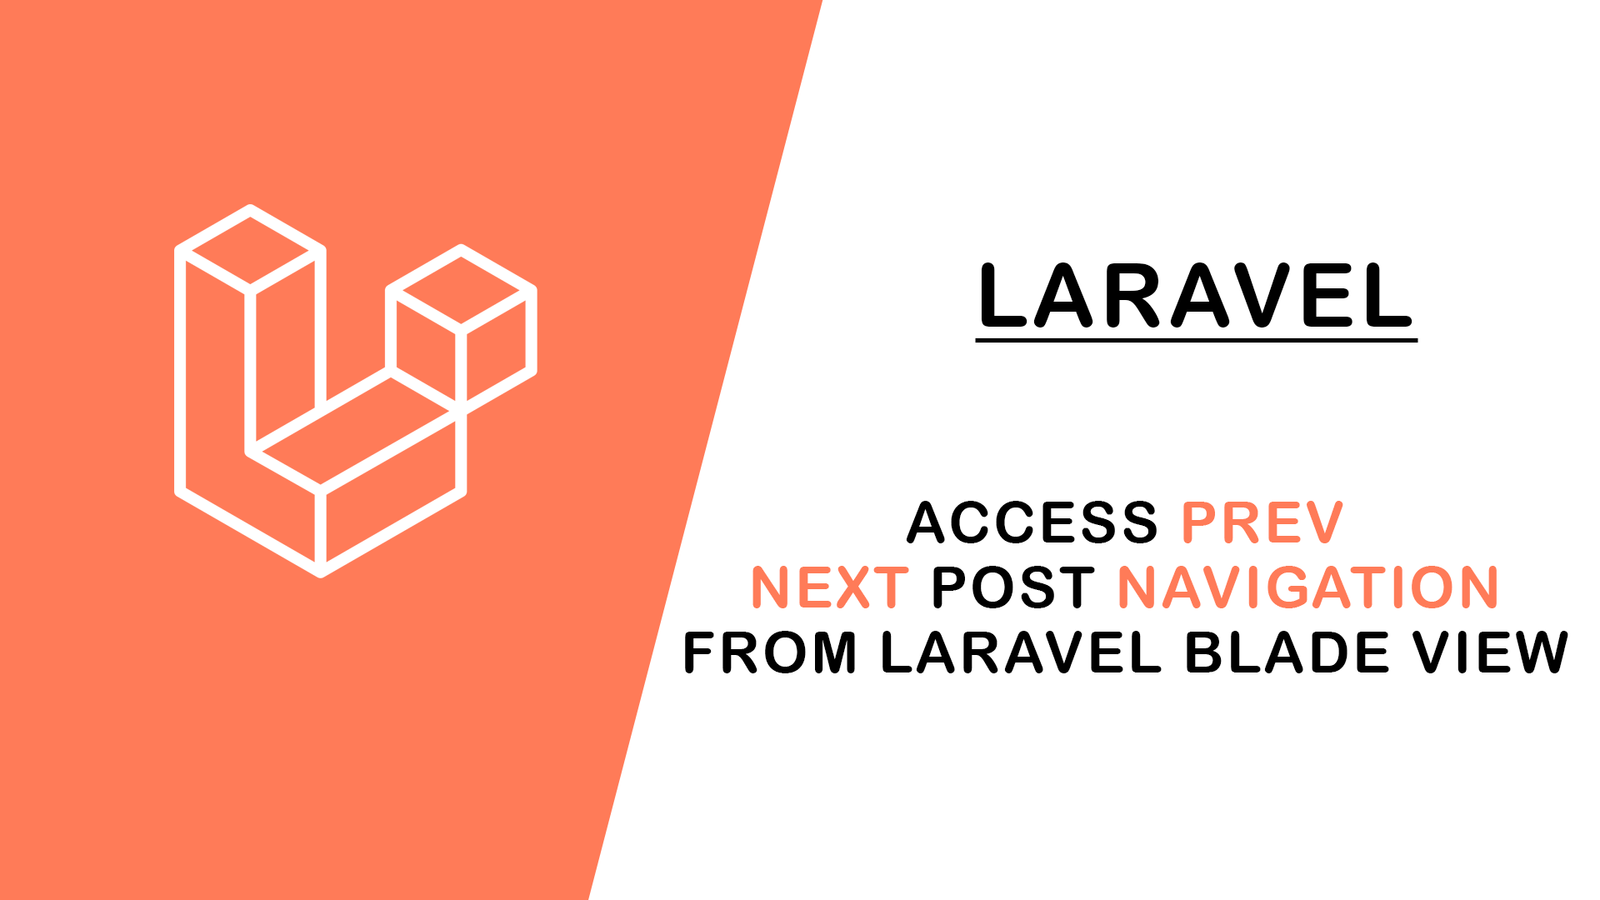 Access Prev Next Post Navigation from Laravel Blade View